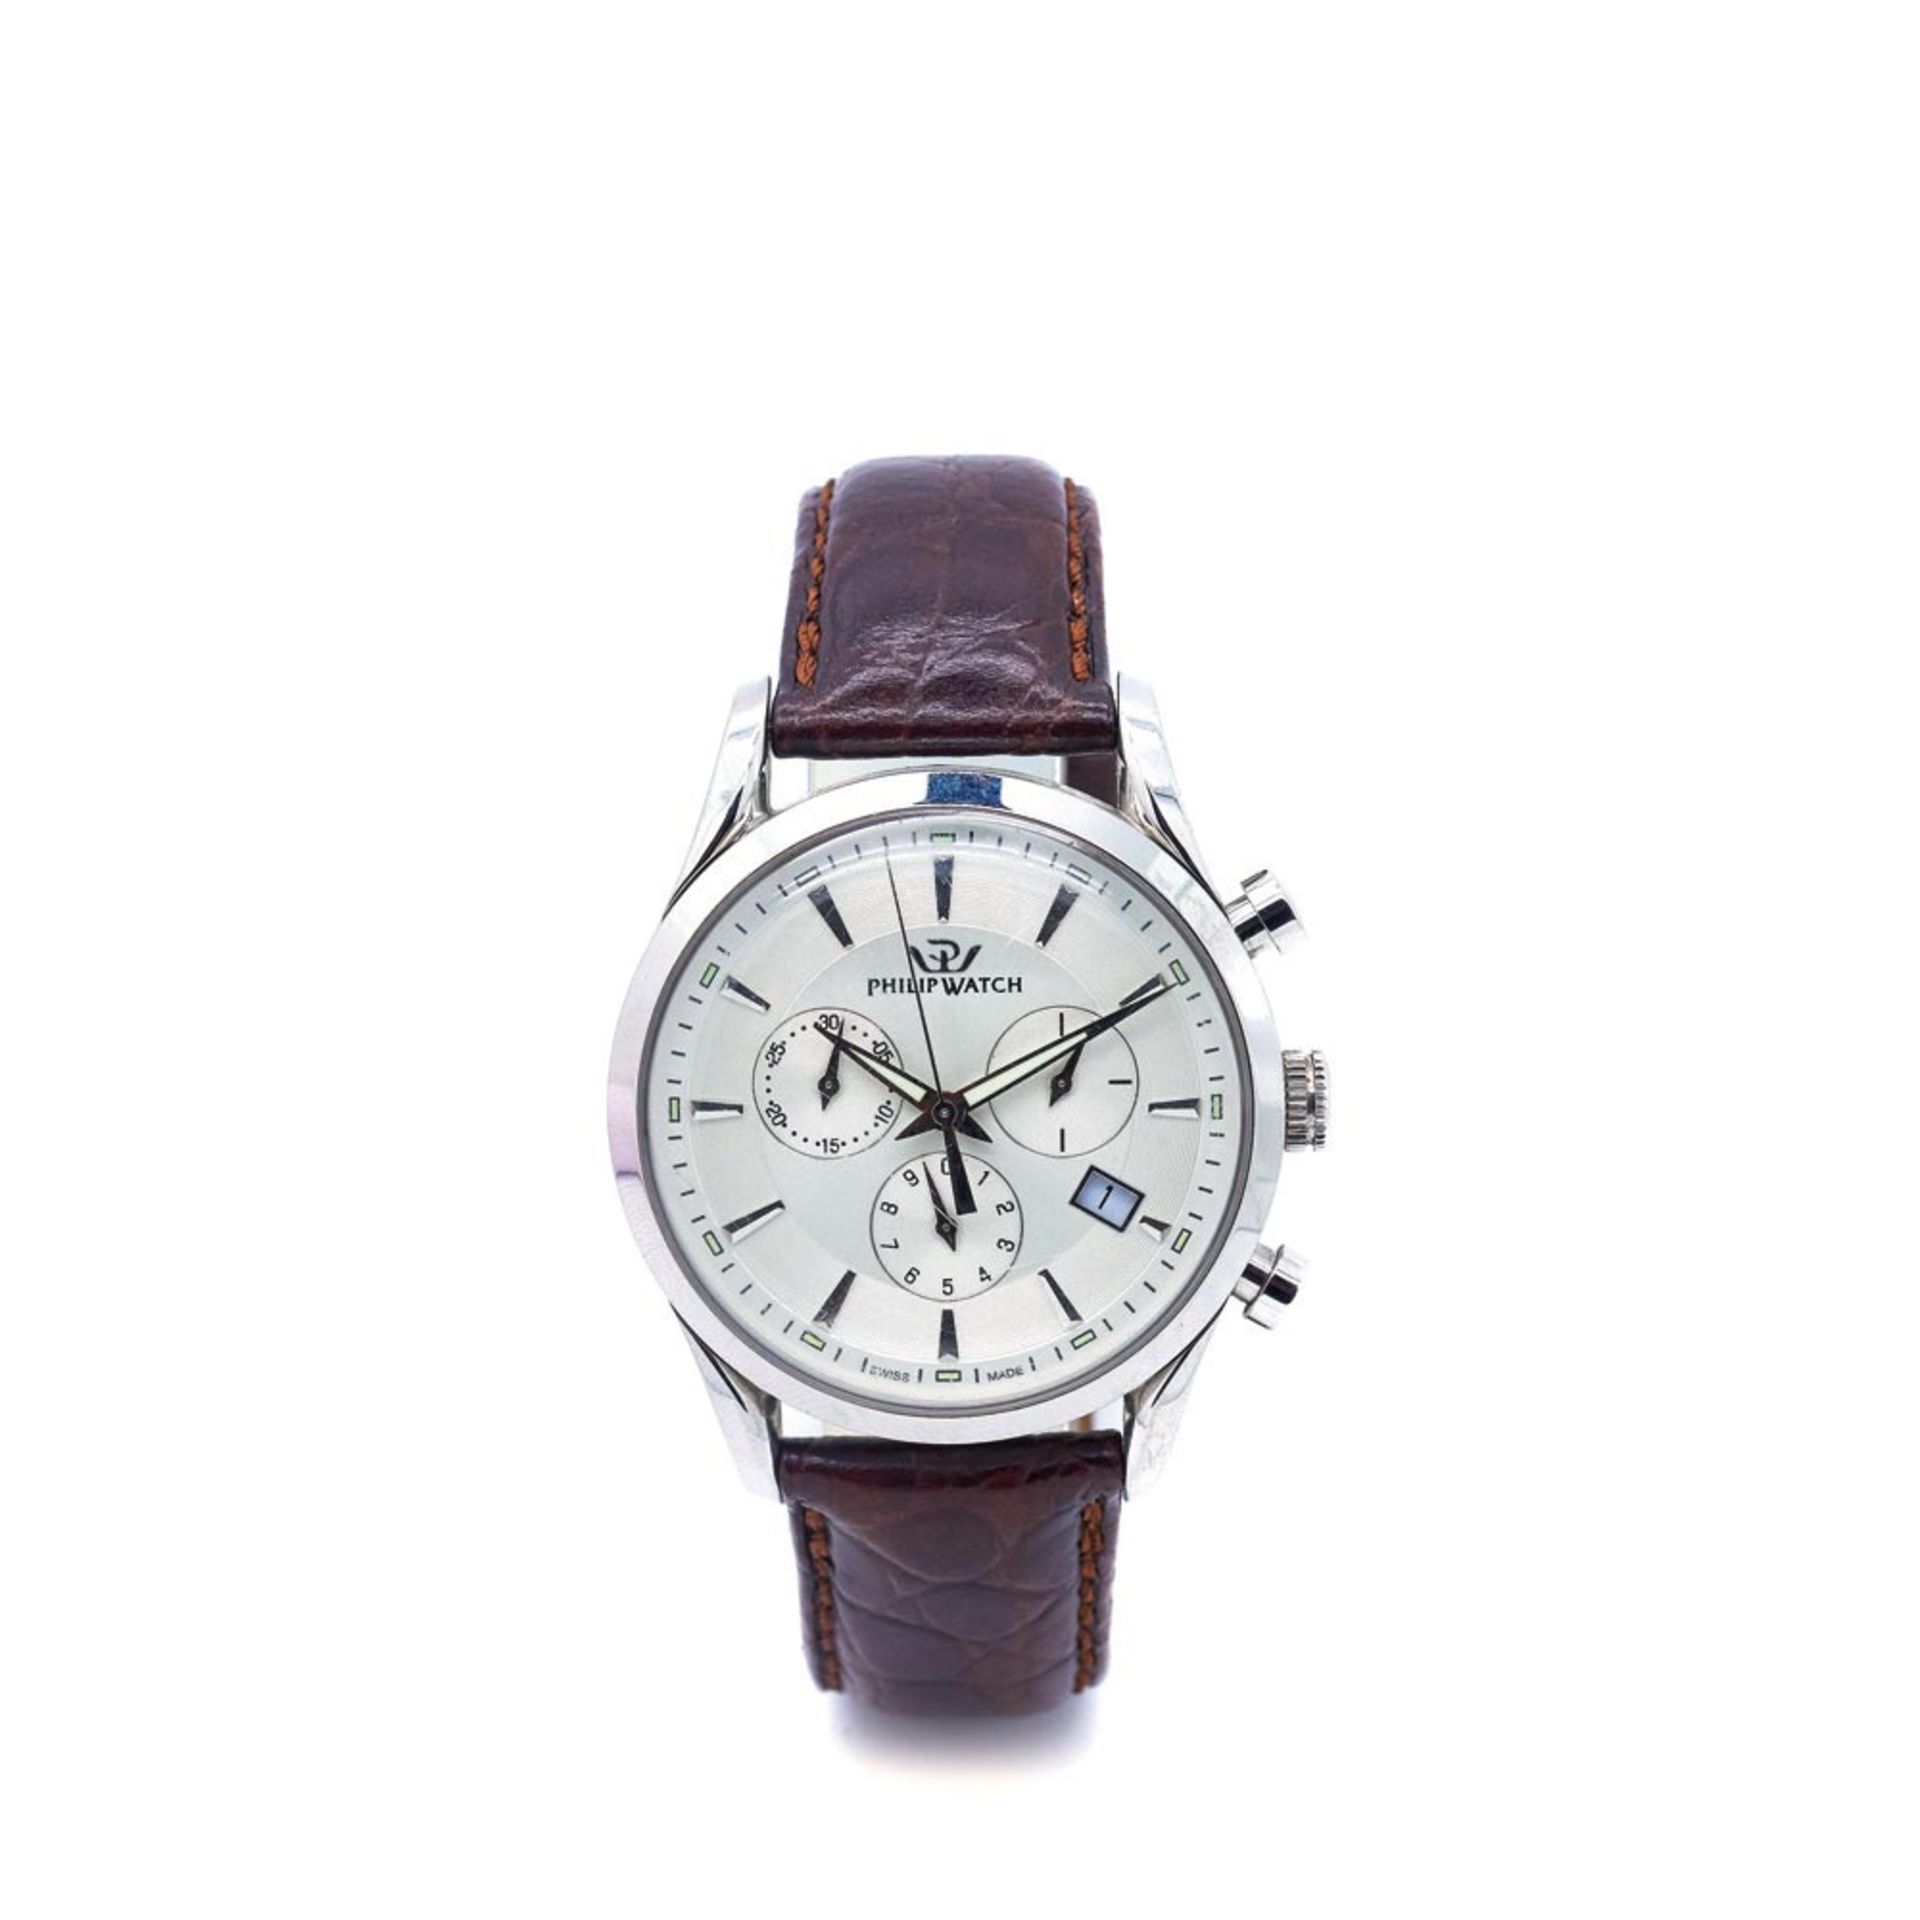 Philip Watch steel and leather wristwatch